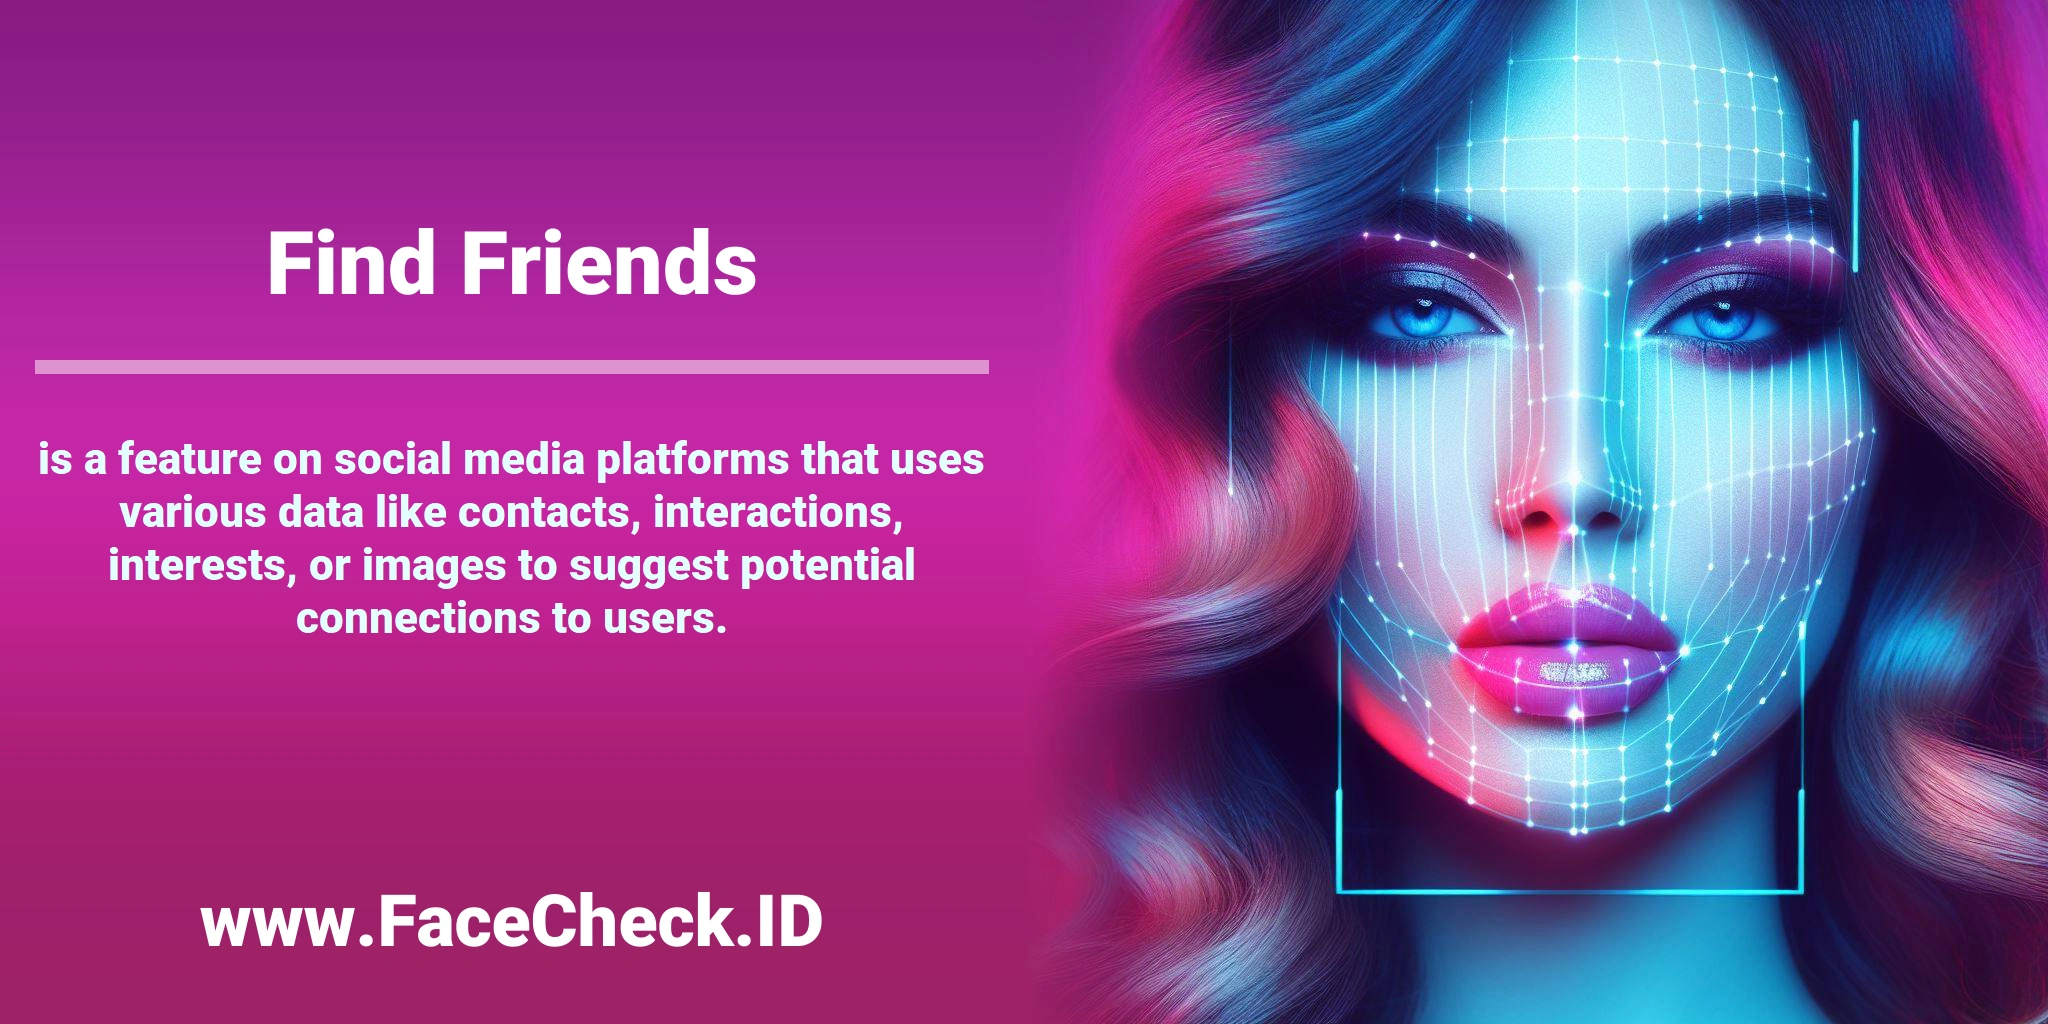 <b>Find Friends</b> is a feature on social media platforms that uses various data like contacts, interactions, interests, or images to suggest potential connections to users.